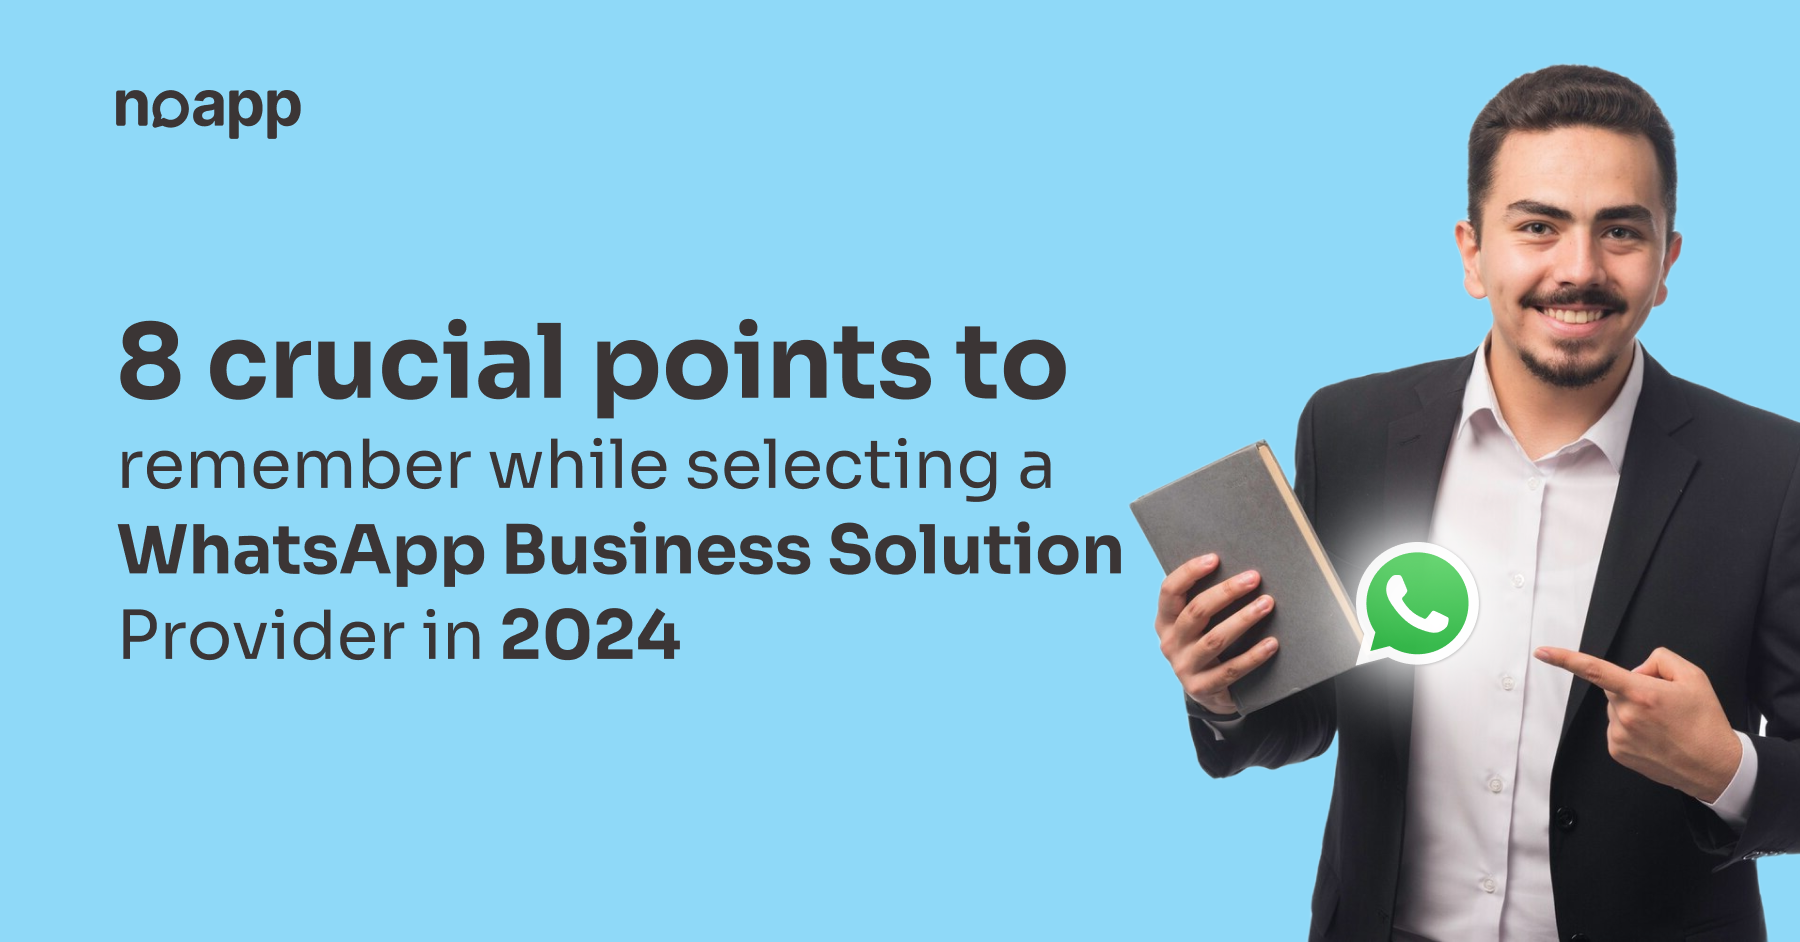 8 crucial points to remember while selecting a WhatsApp Business Solution Provider in 2024